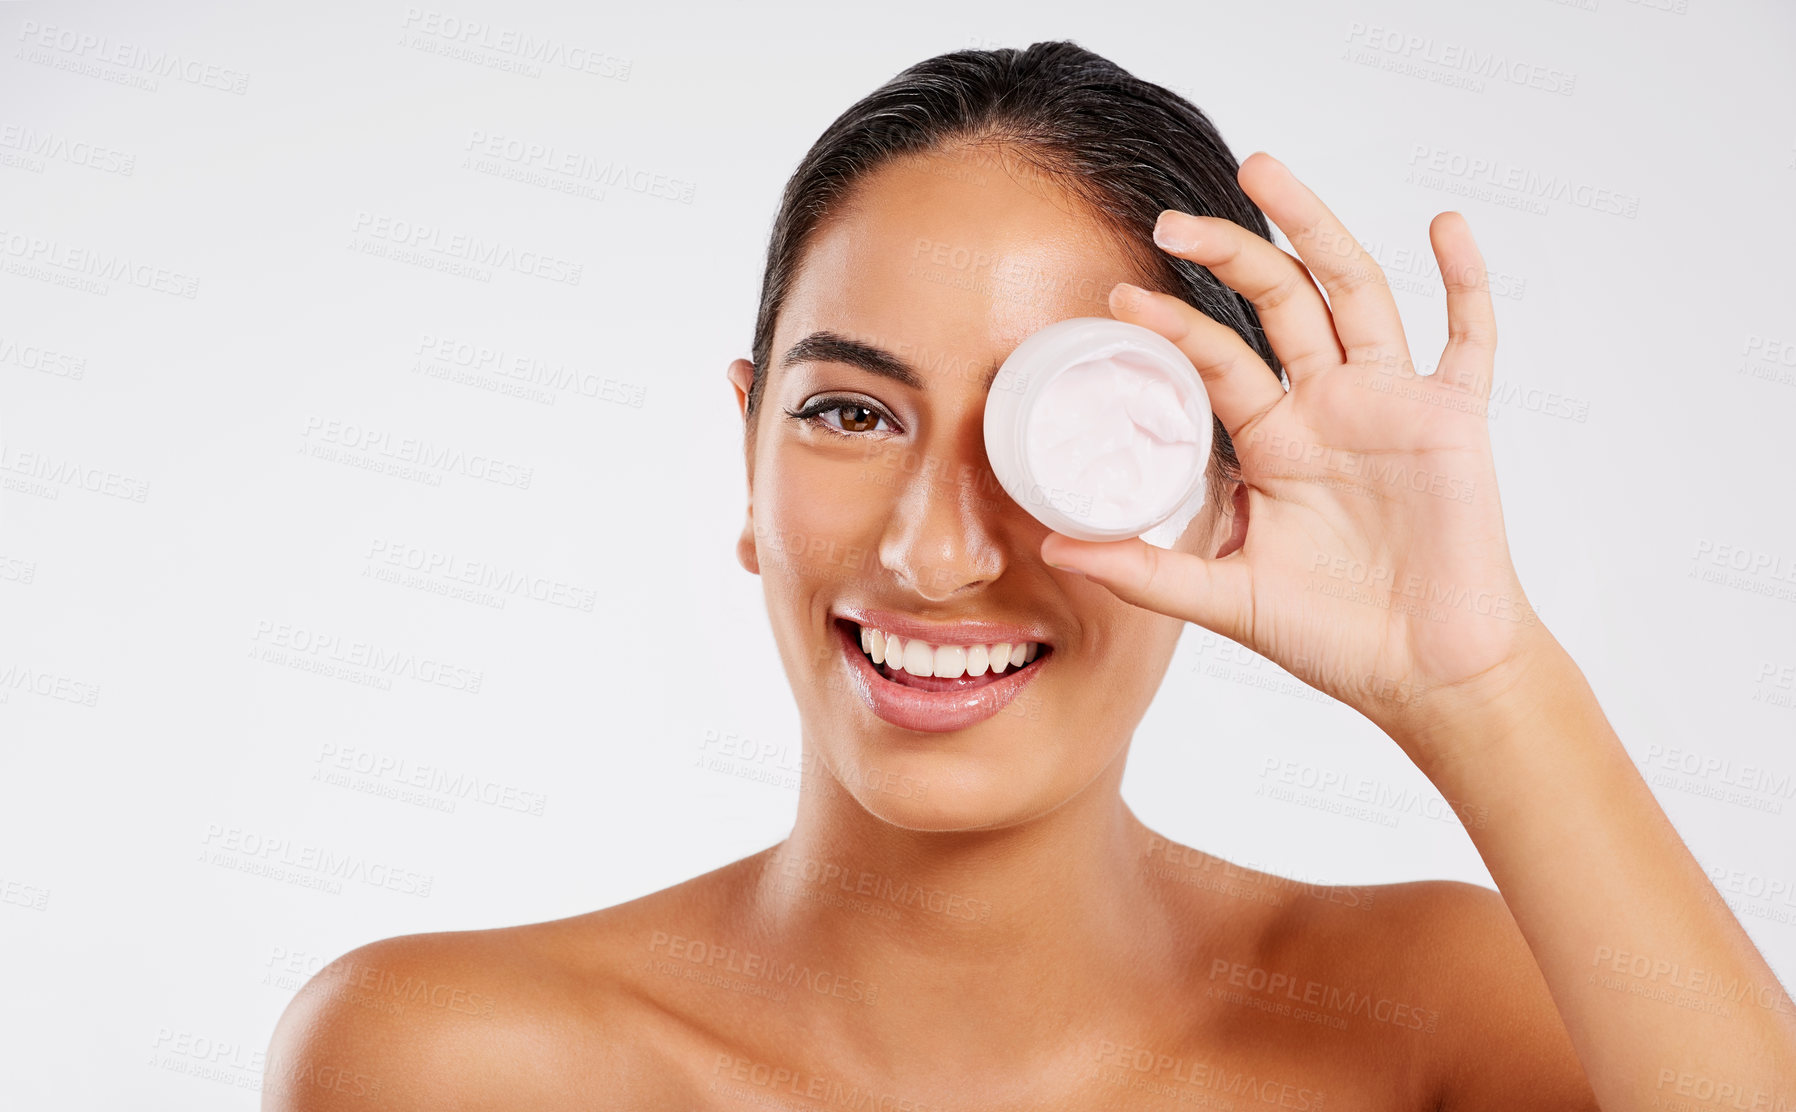 Buy stock photo Studio portrait of a beautiful young woman holding a container of lotion against a gray background